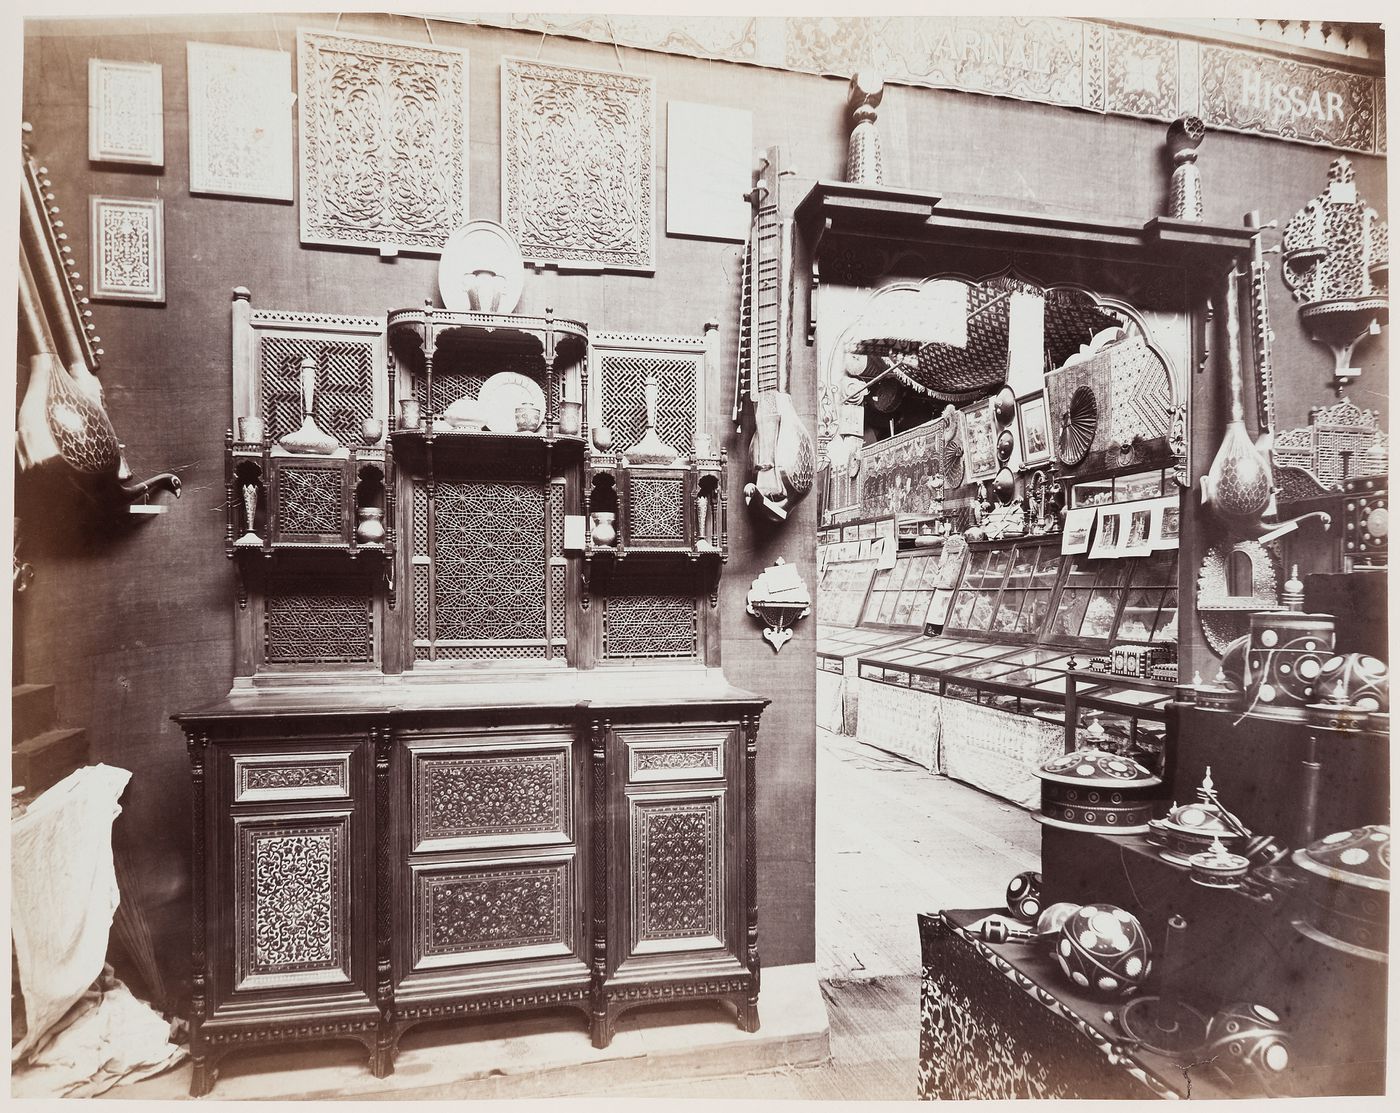 Interior view of a pavilion showing the Punjab exhibit, Calcutta International Exhibition of 1883-1884, India